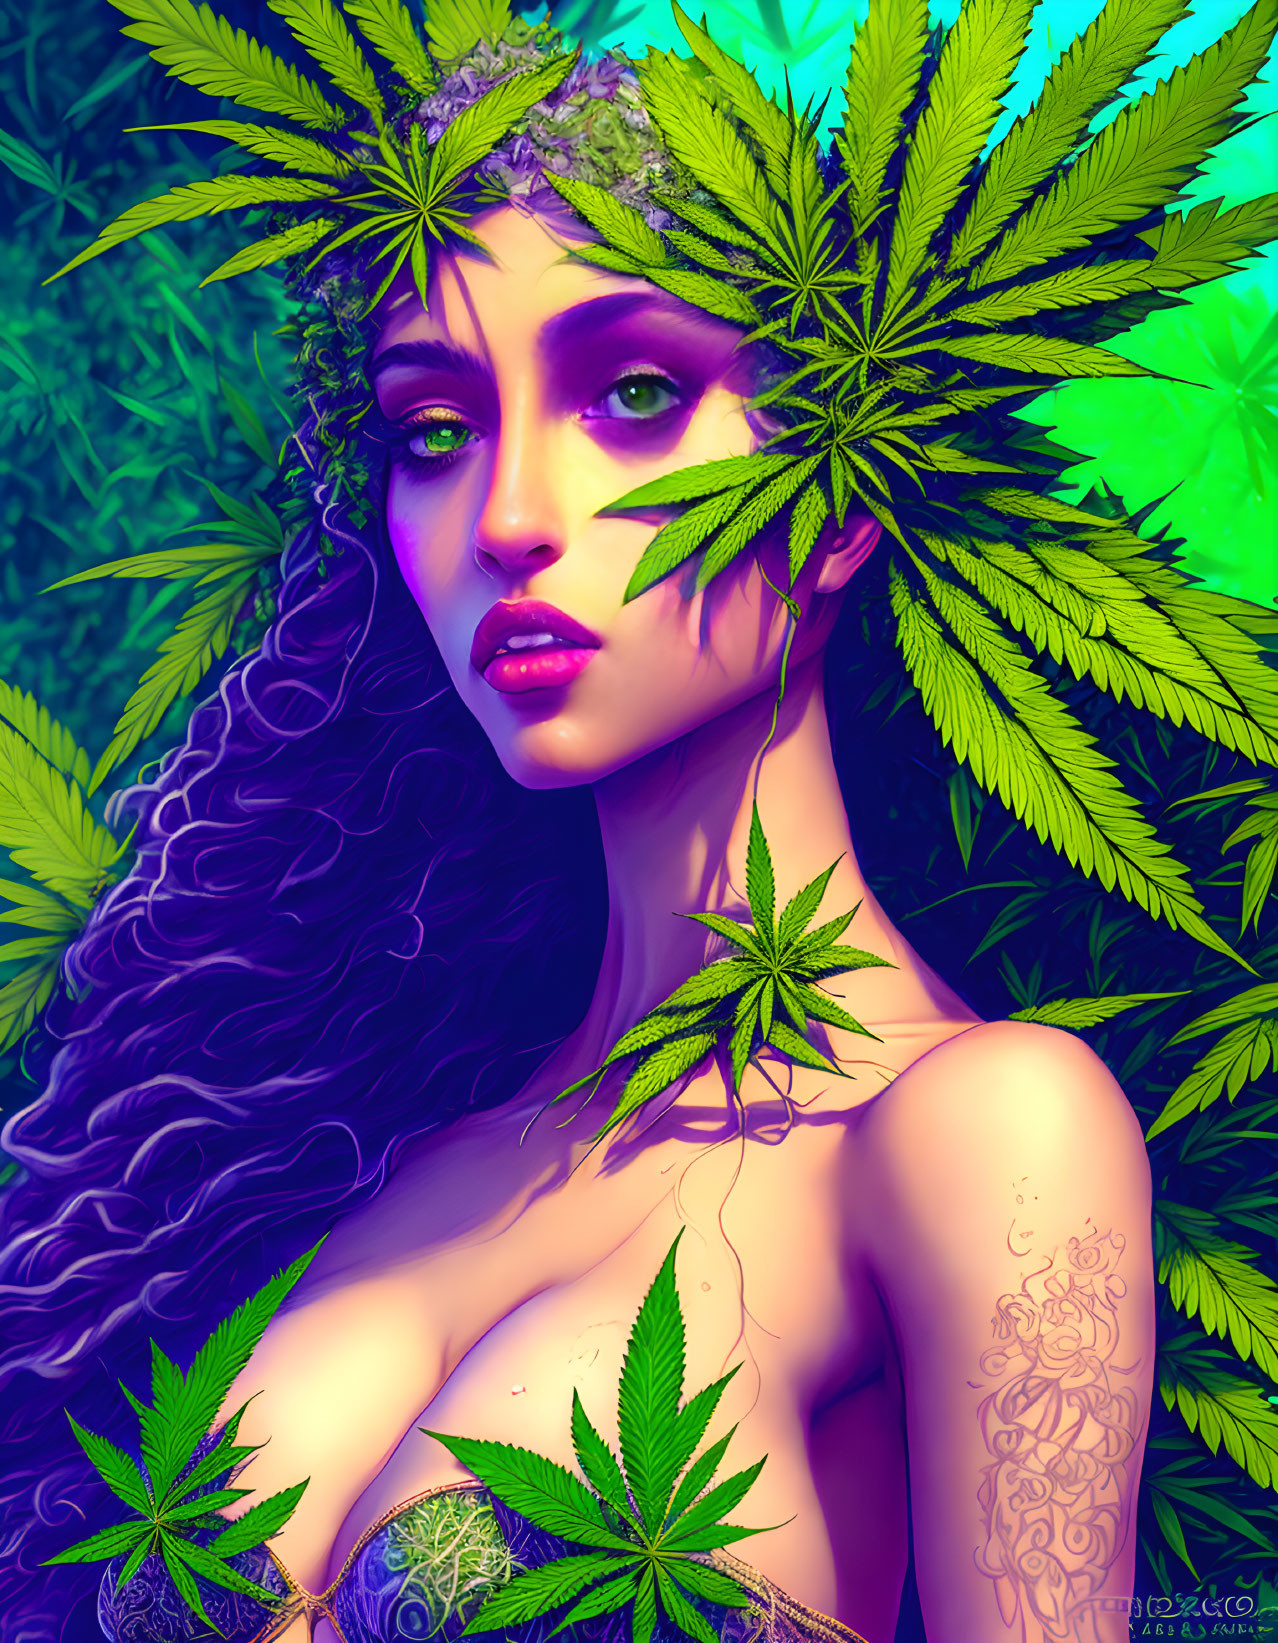 Purple-haired woman with cannabis leaf hair accessories and vibrant tattoos.